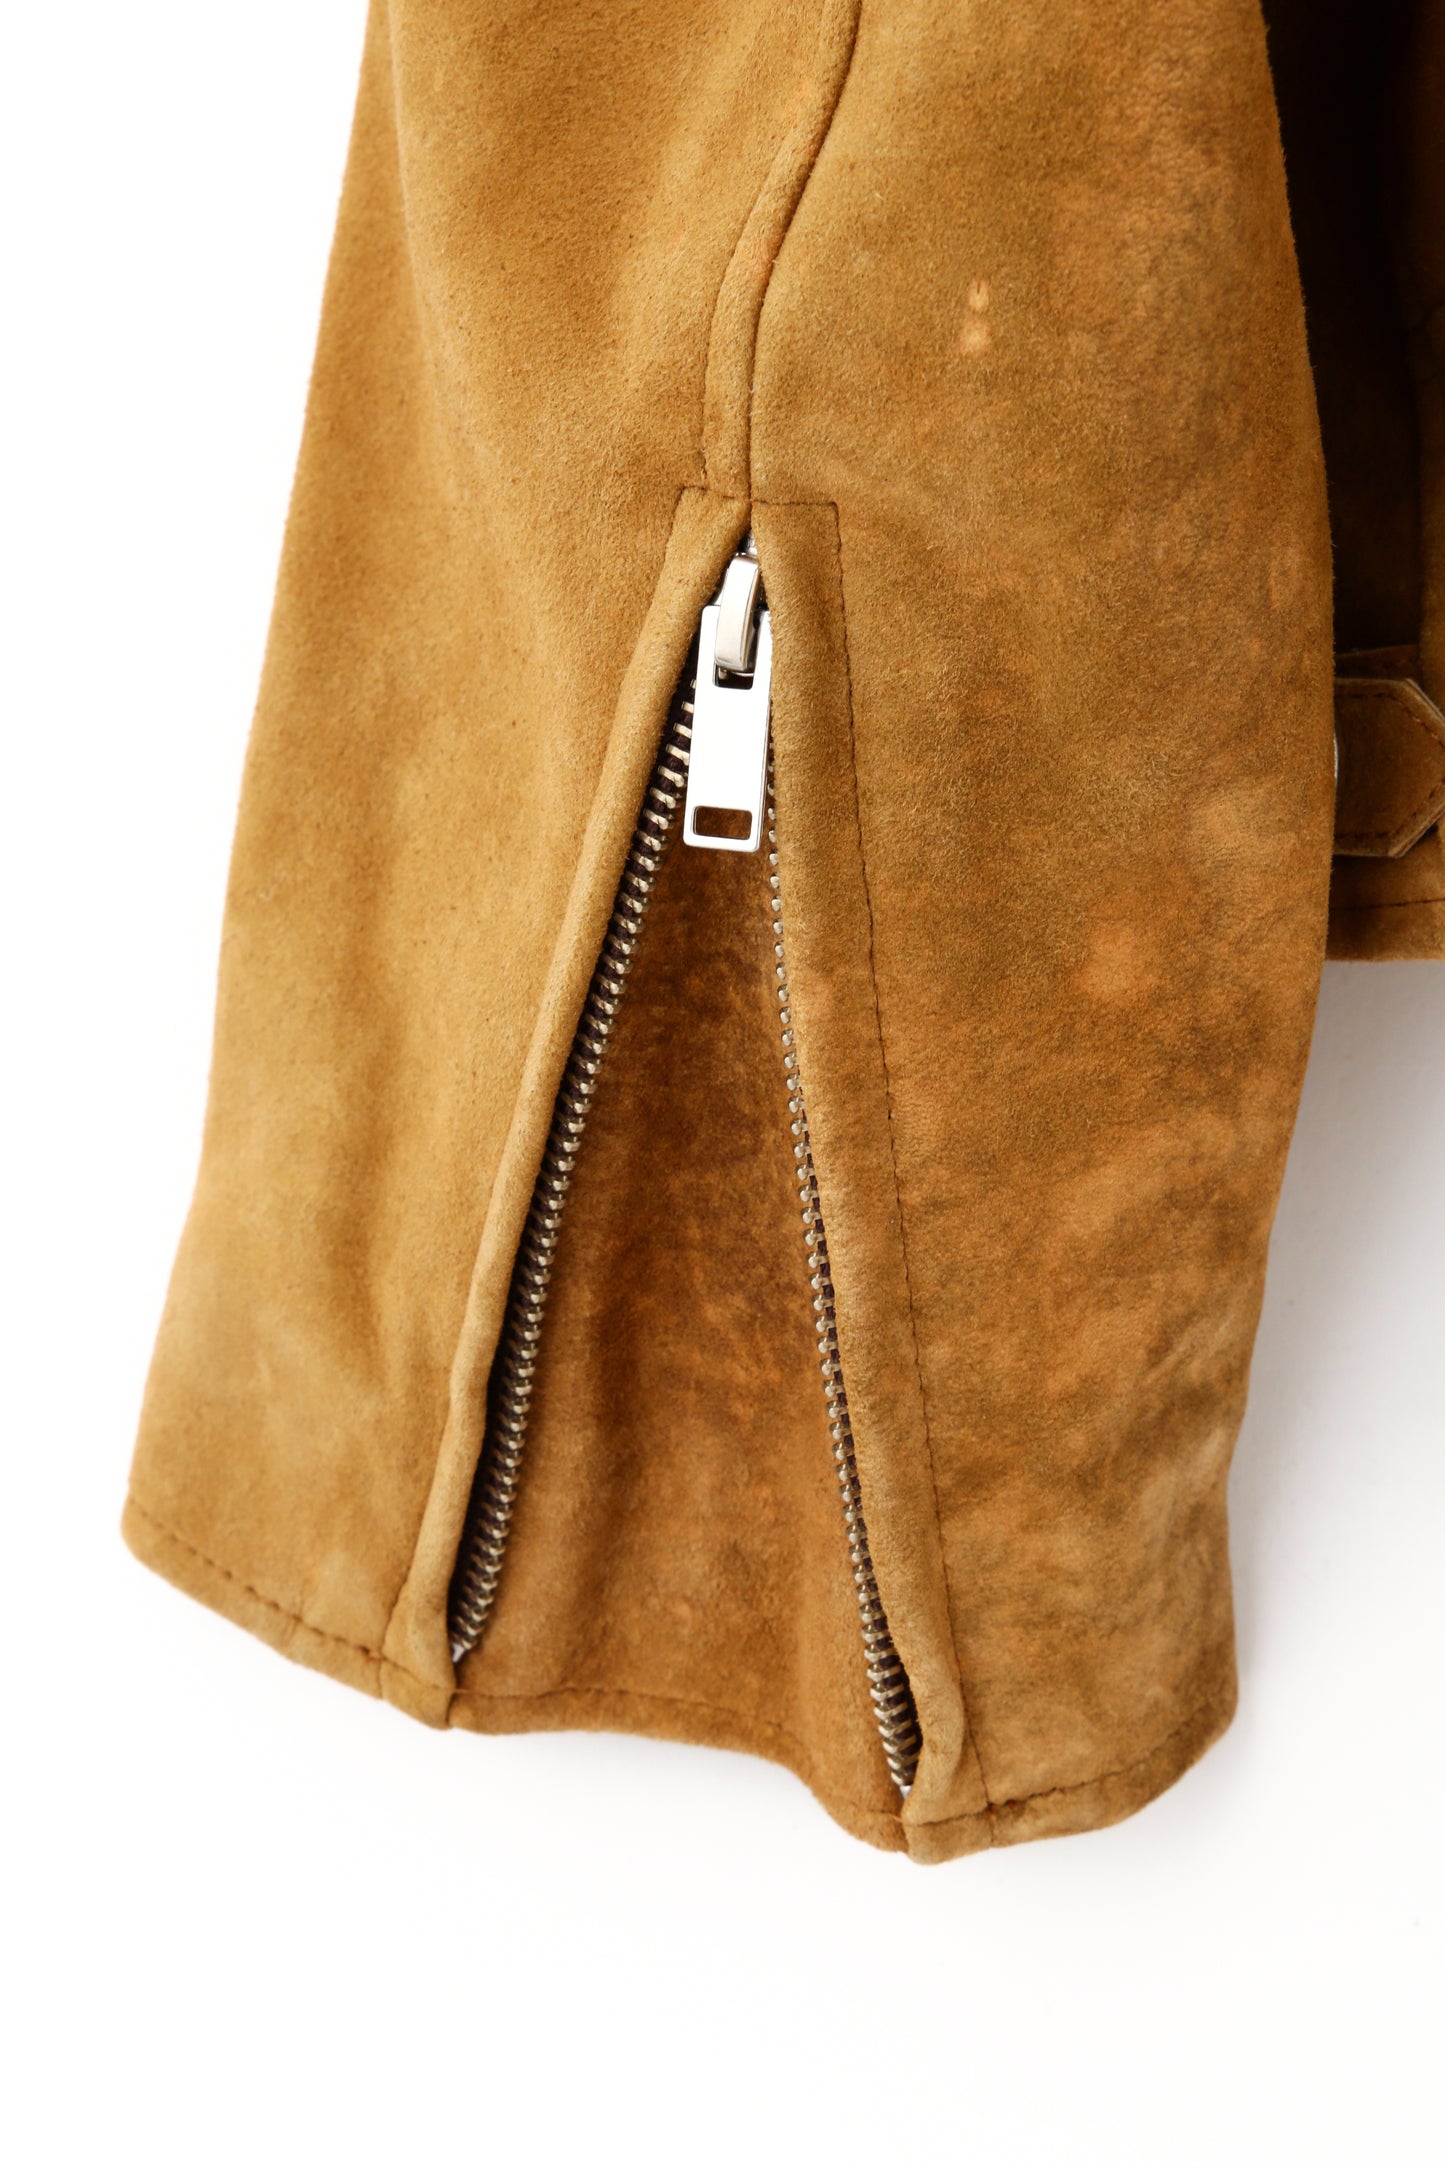 SUEDE LEATHER RIDERS JACKET -Sheep suede cashmere finish-